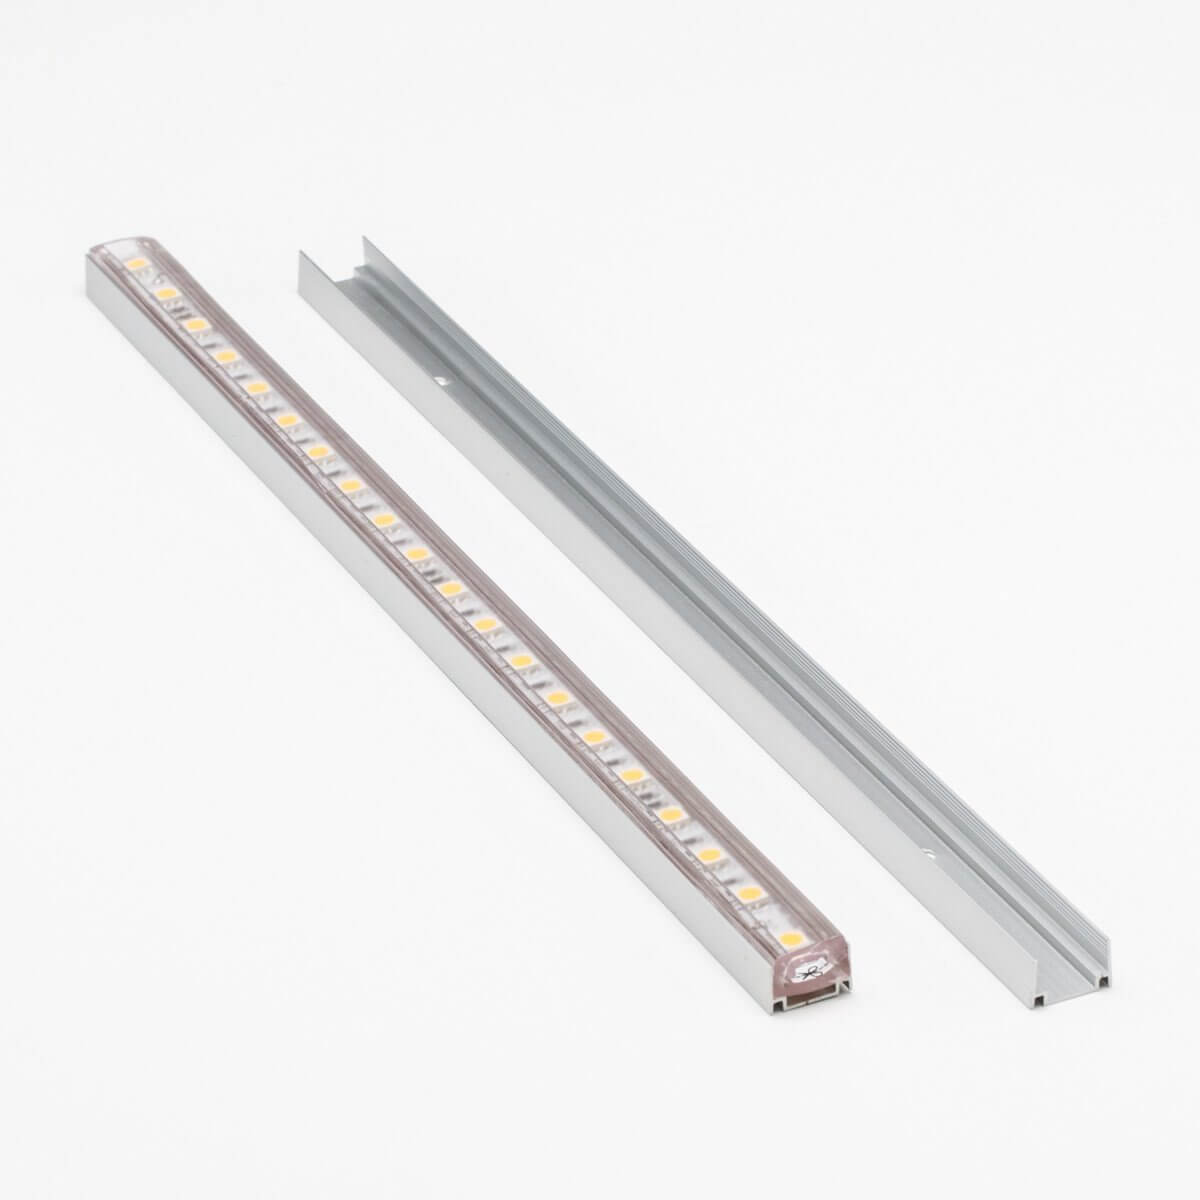 Load image into Gallery viewer, led strip light with yellow chips laid into aluminum led channel
